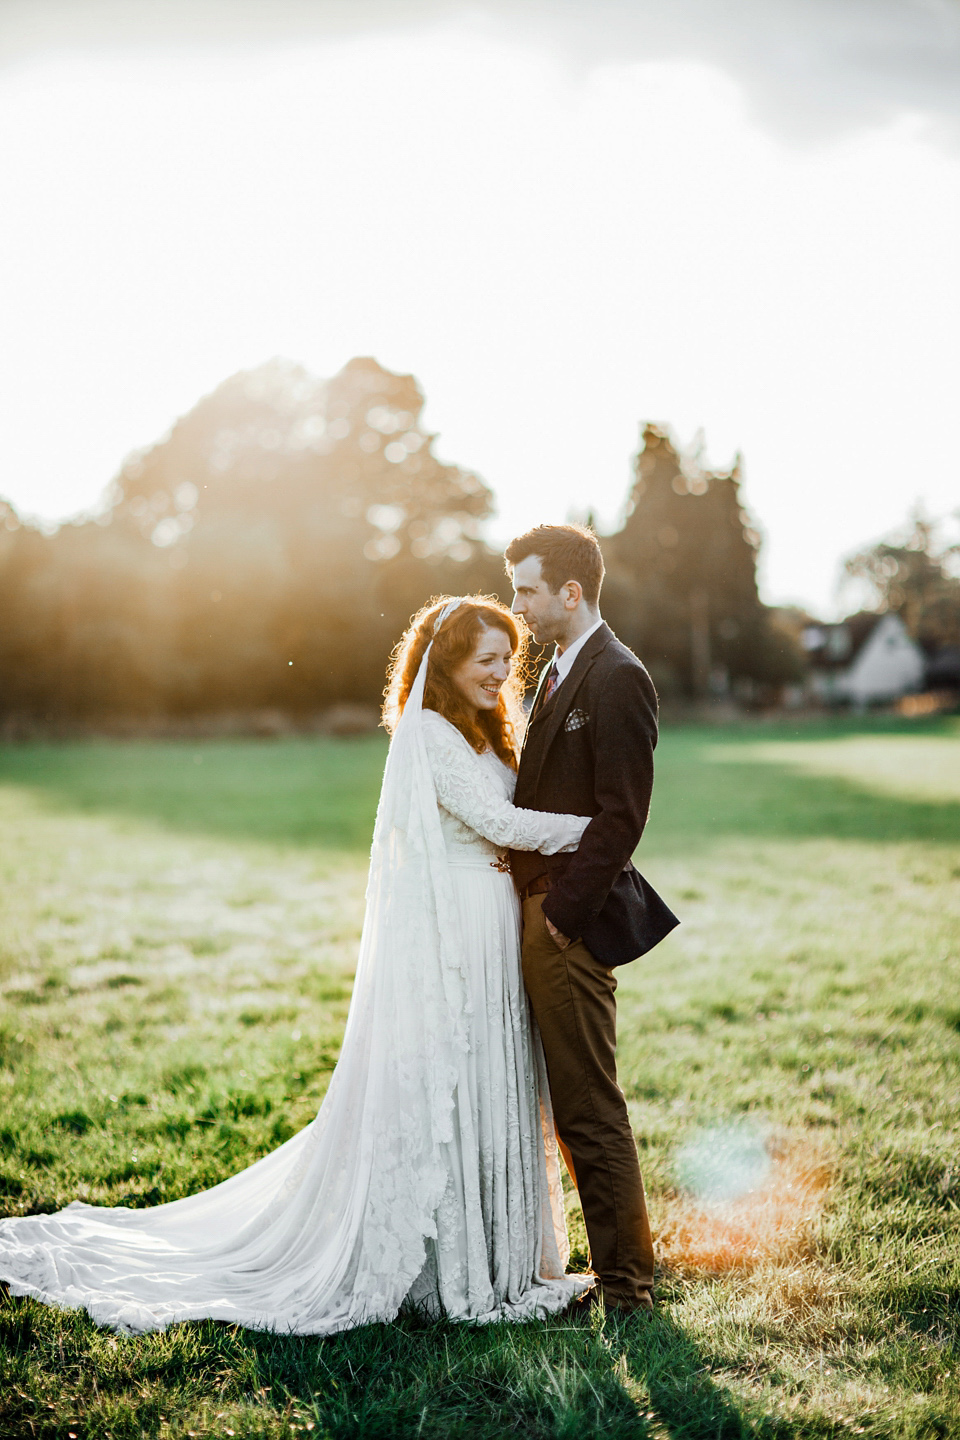 The bride wears an Edwardian inspired wedding dress for her homespun pub wedding. Images by Green Antlers Photography.